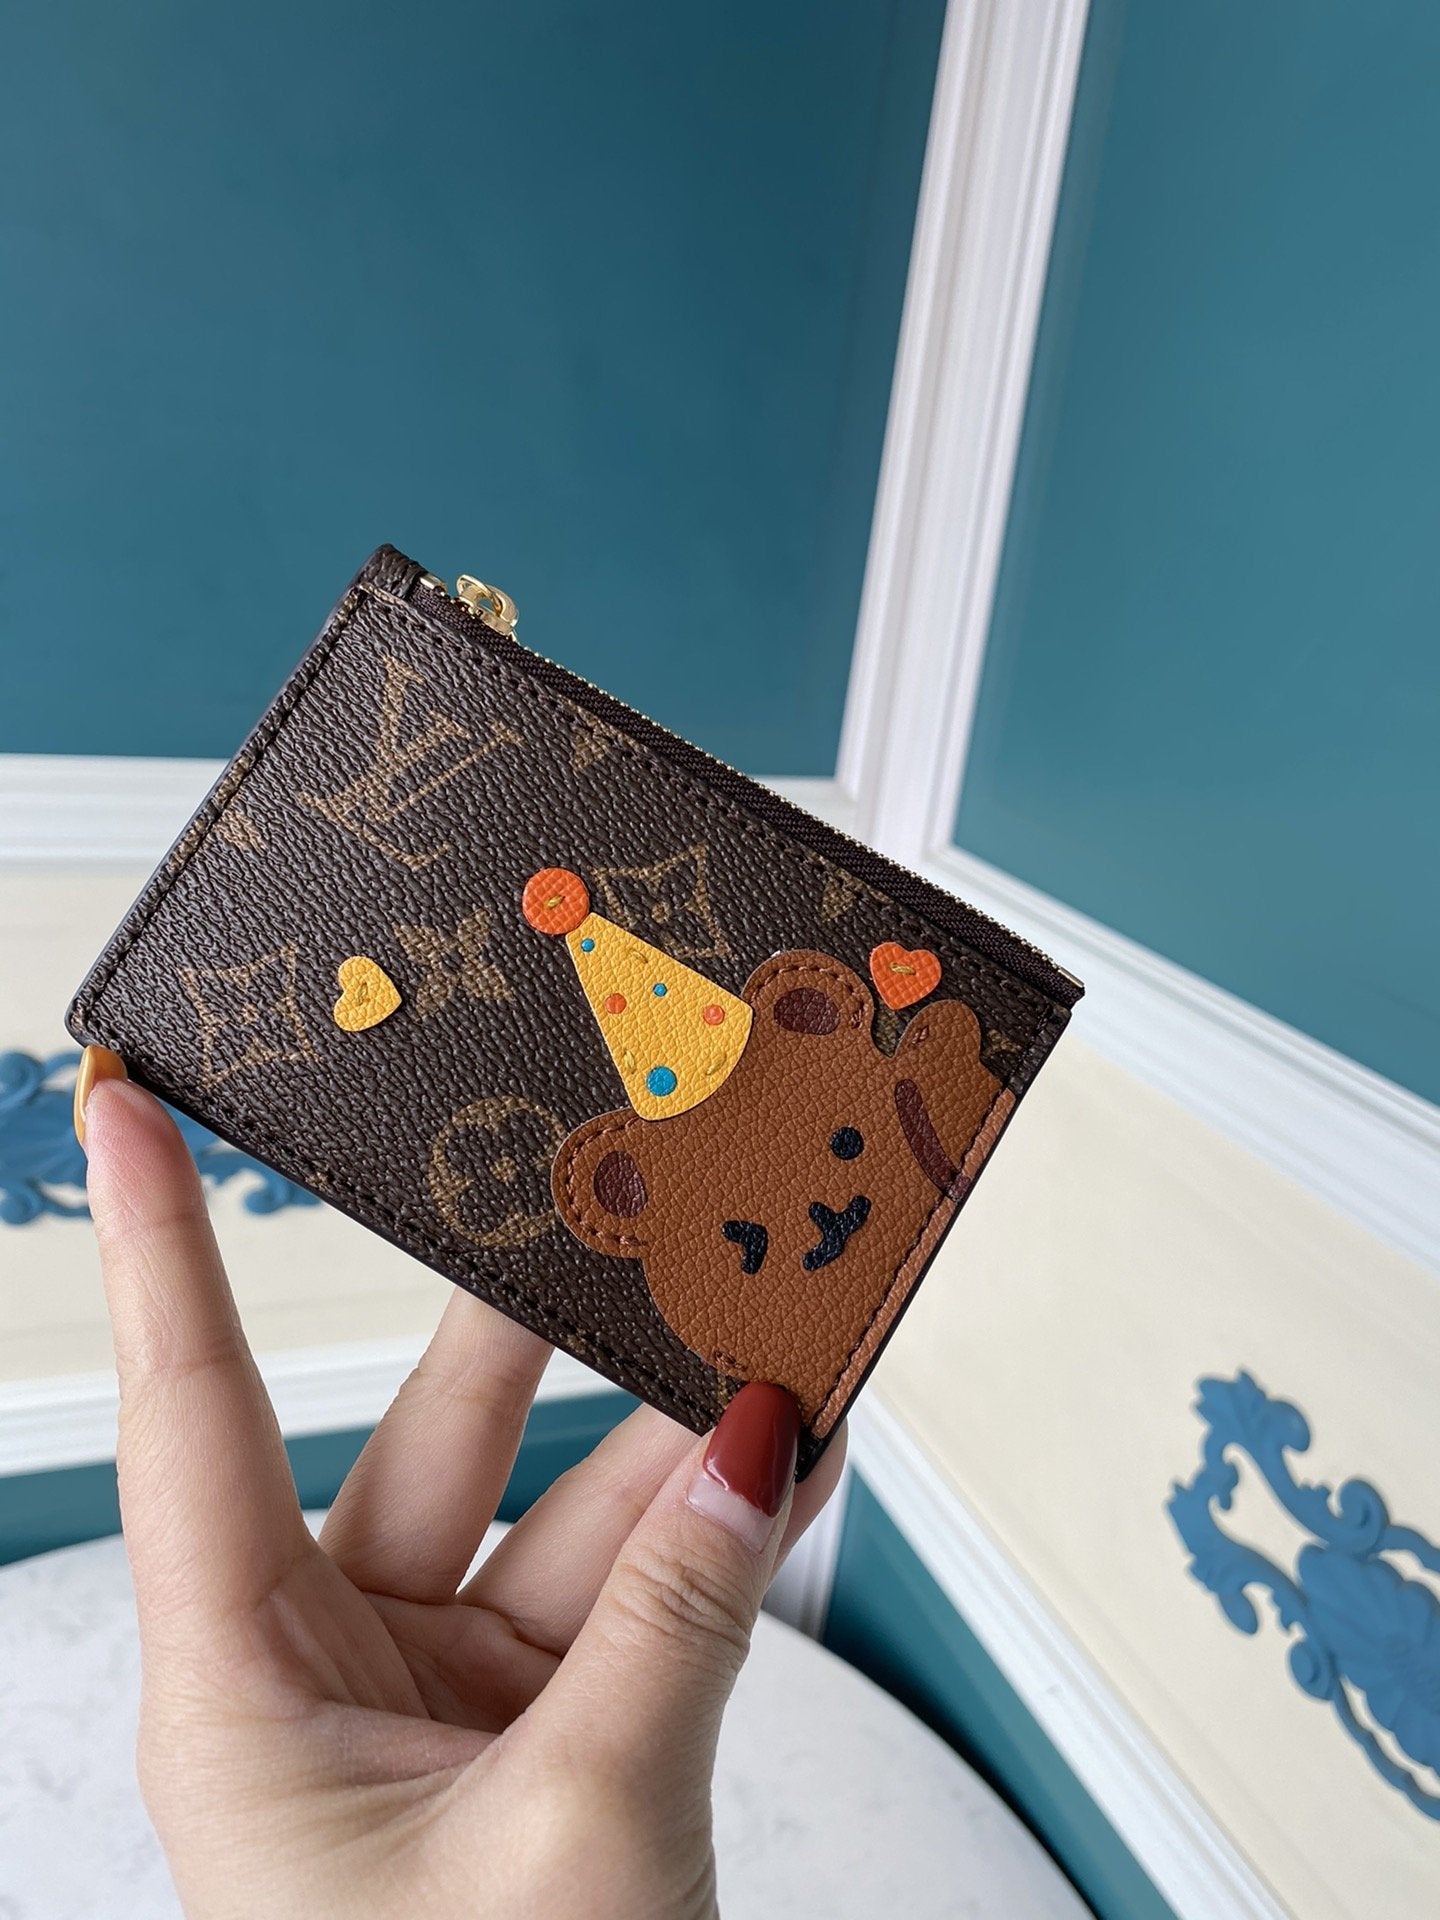 EI -New Wallets LUV 021